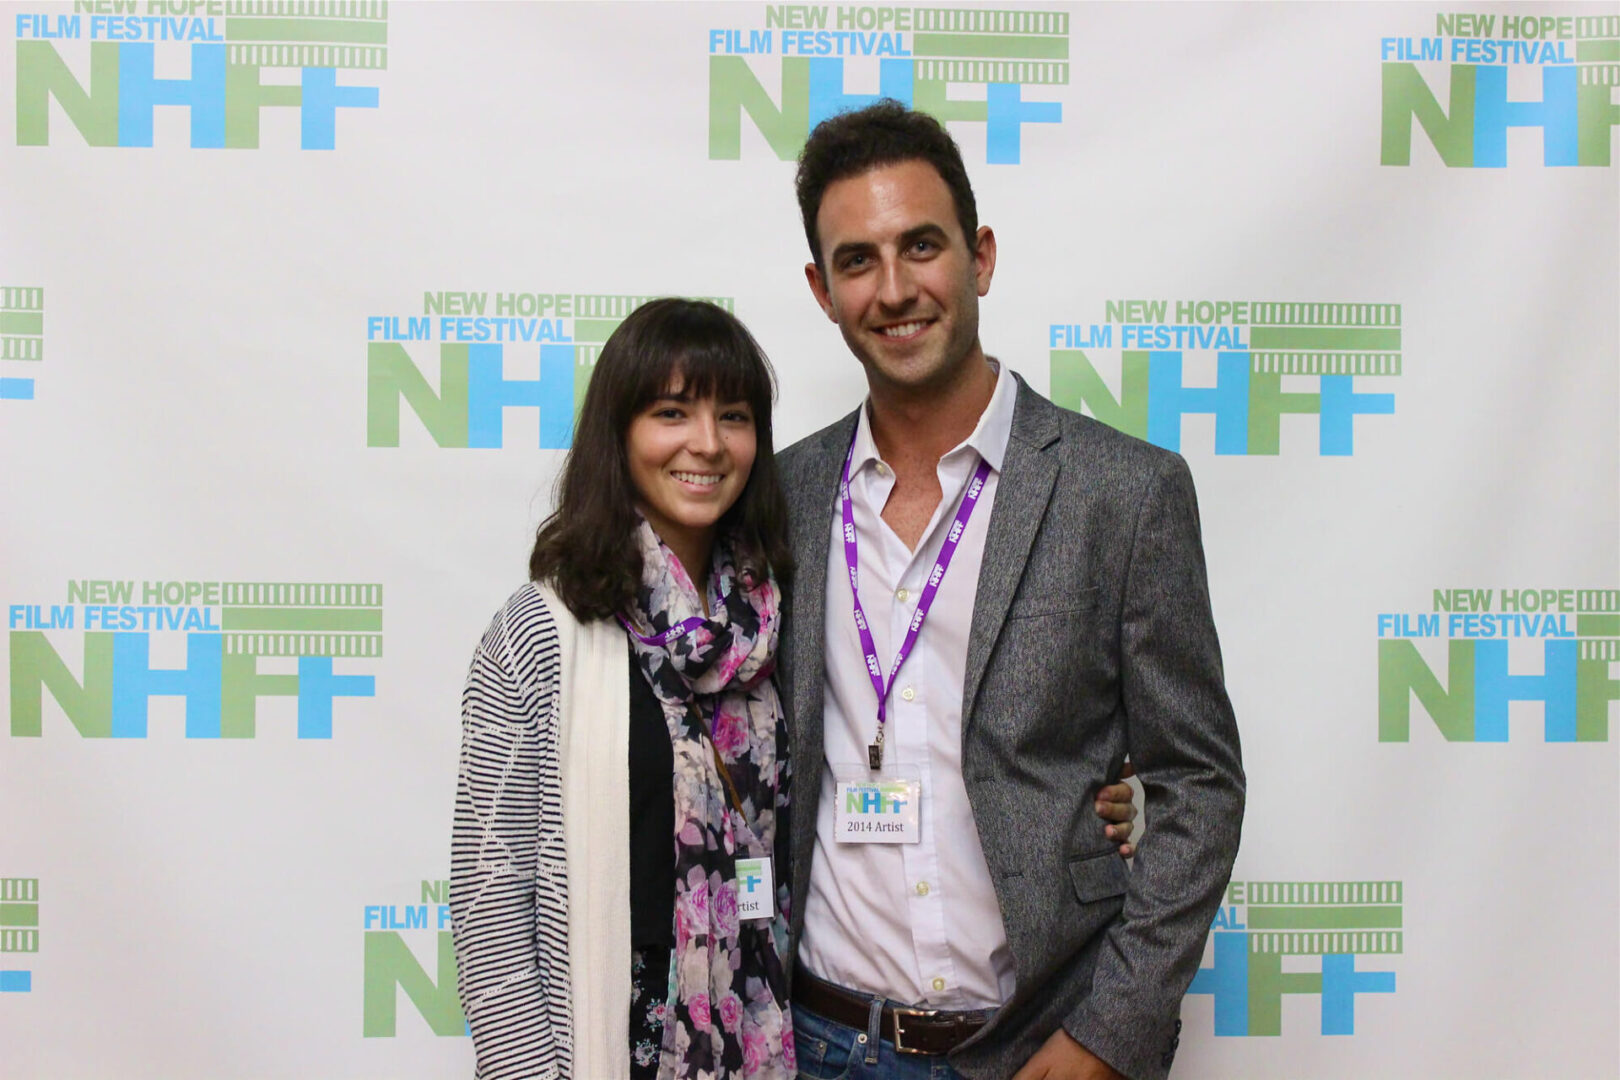 Two film festival attendees in front of a photo wall